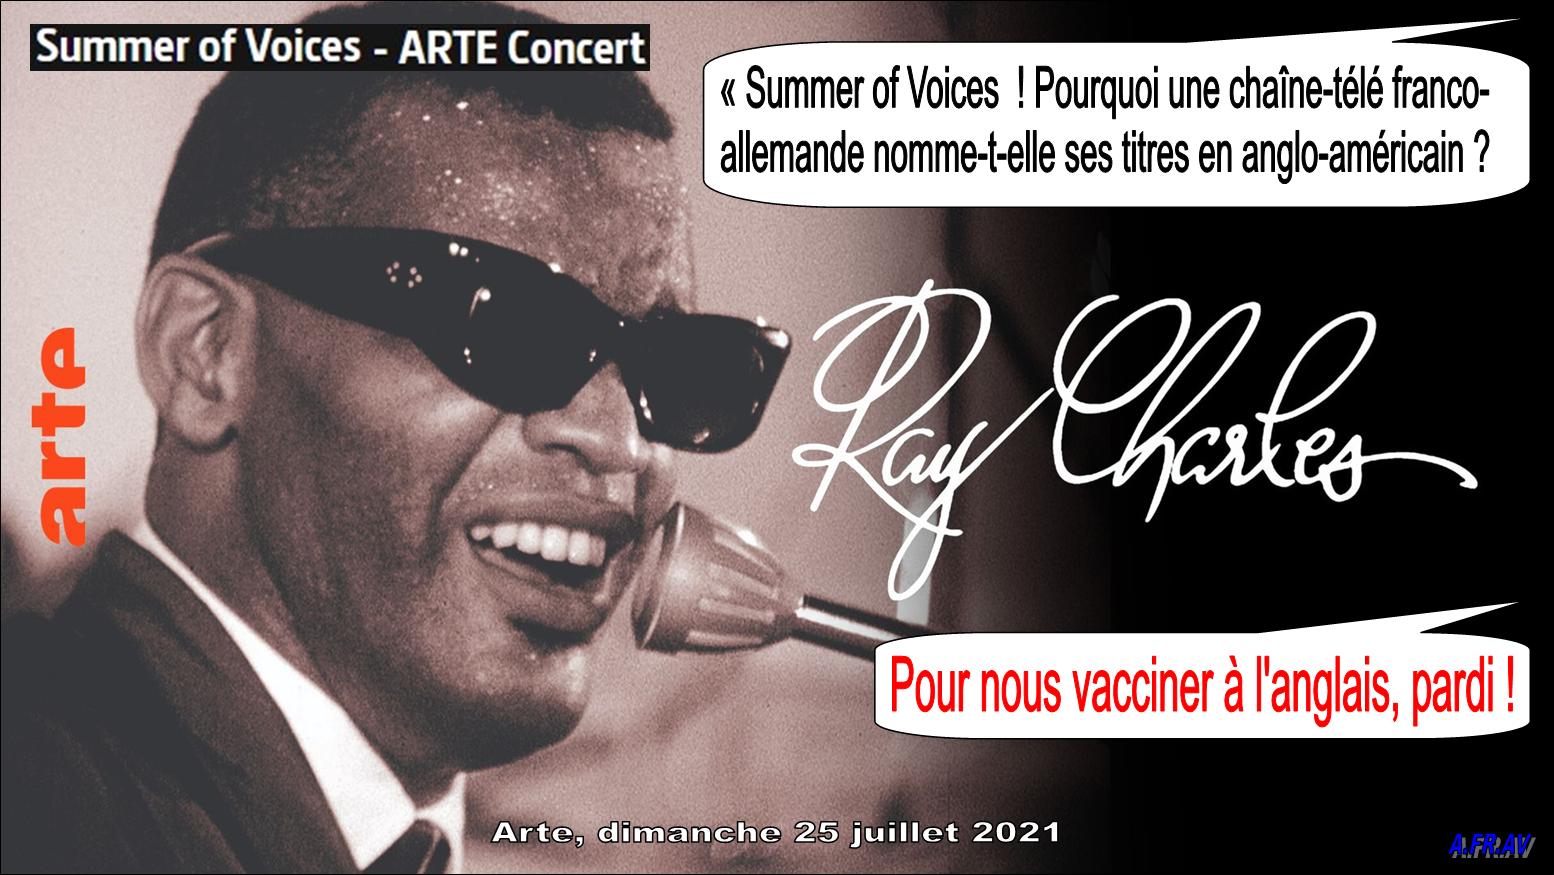 Arte, Summer of Voices, Ray Charles